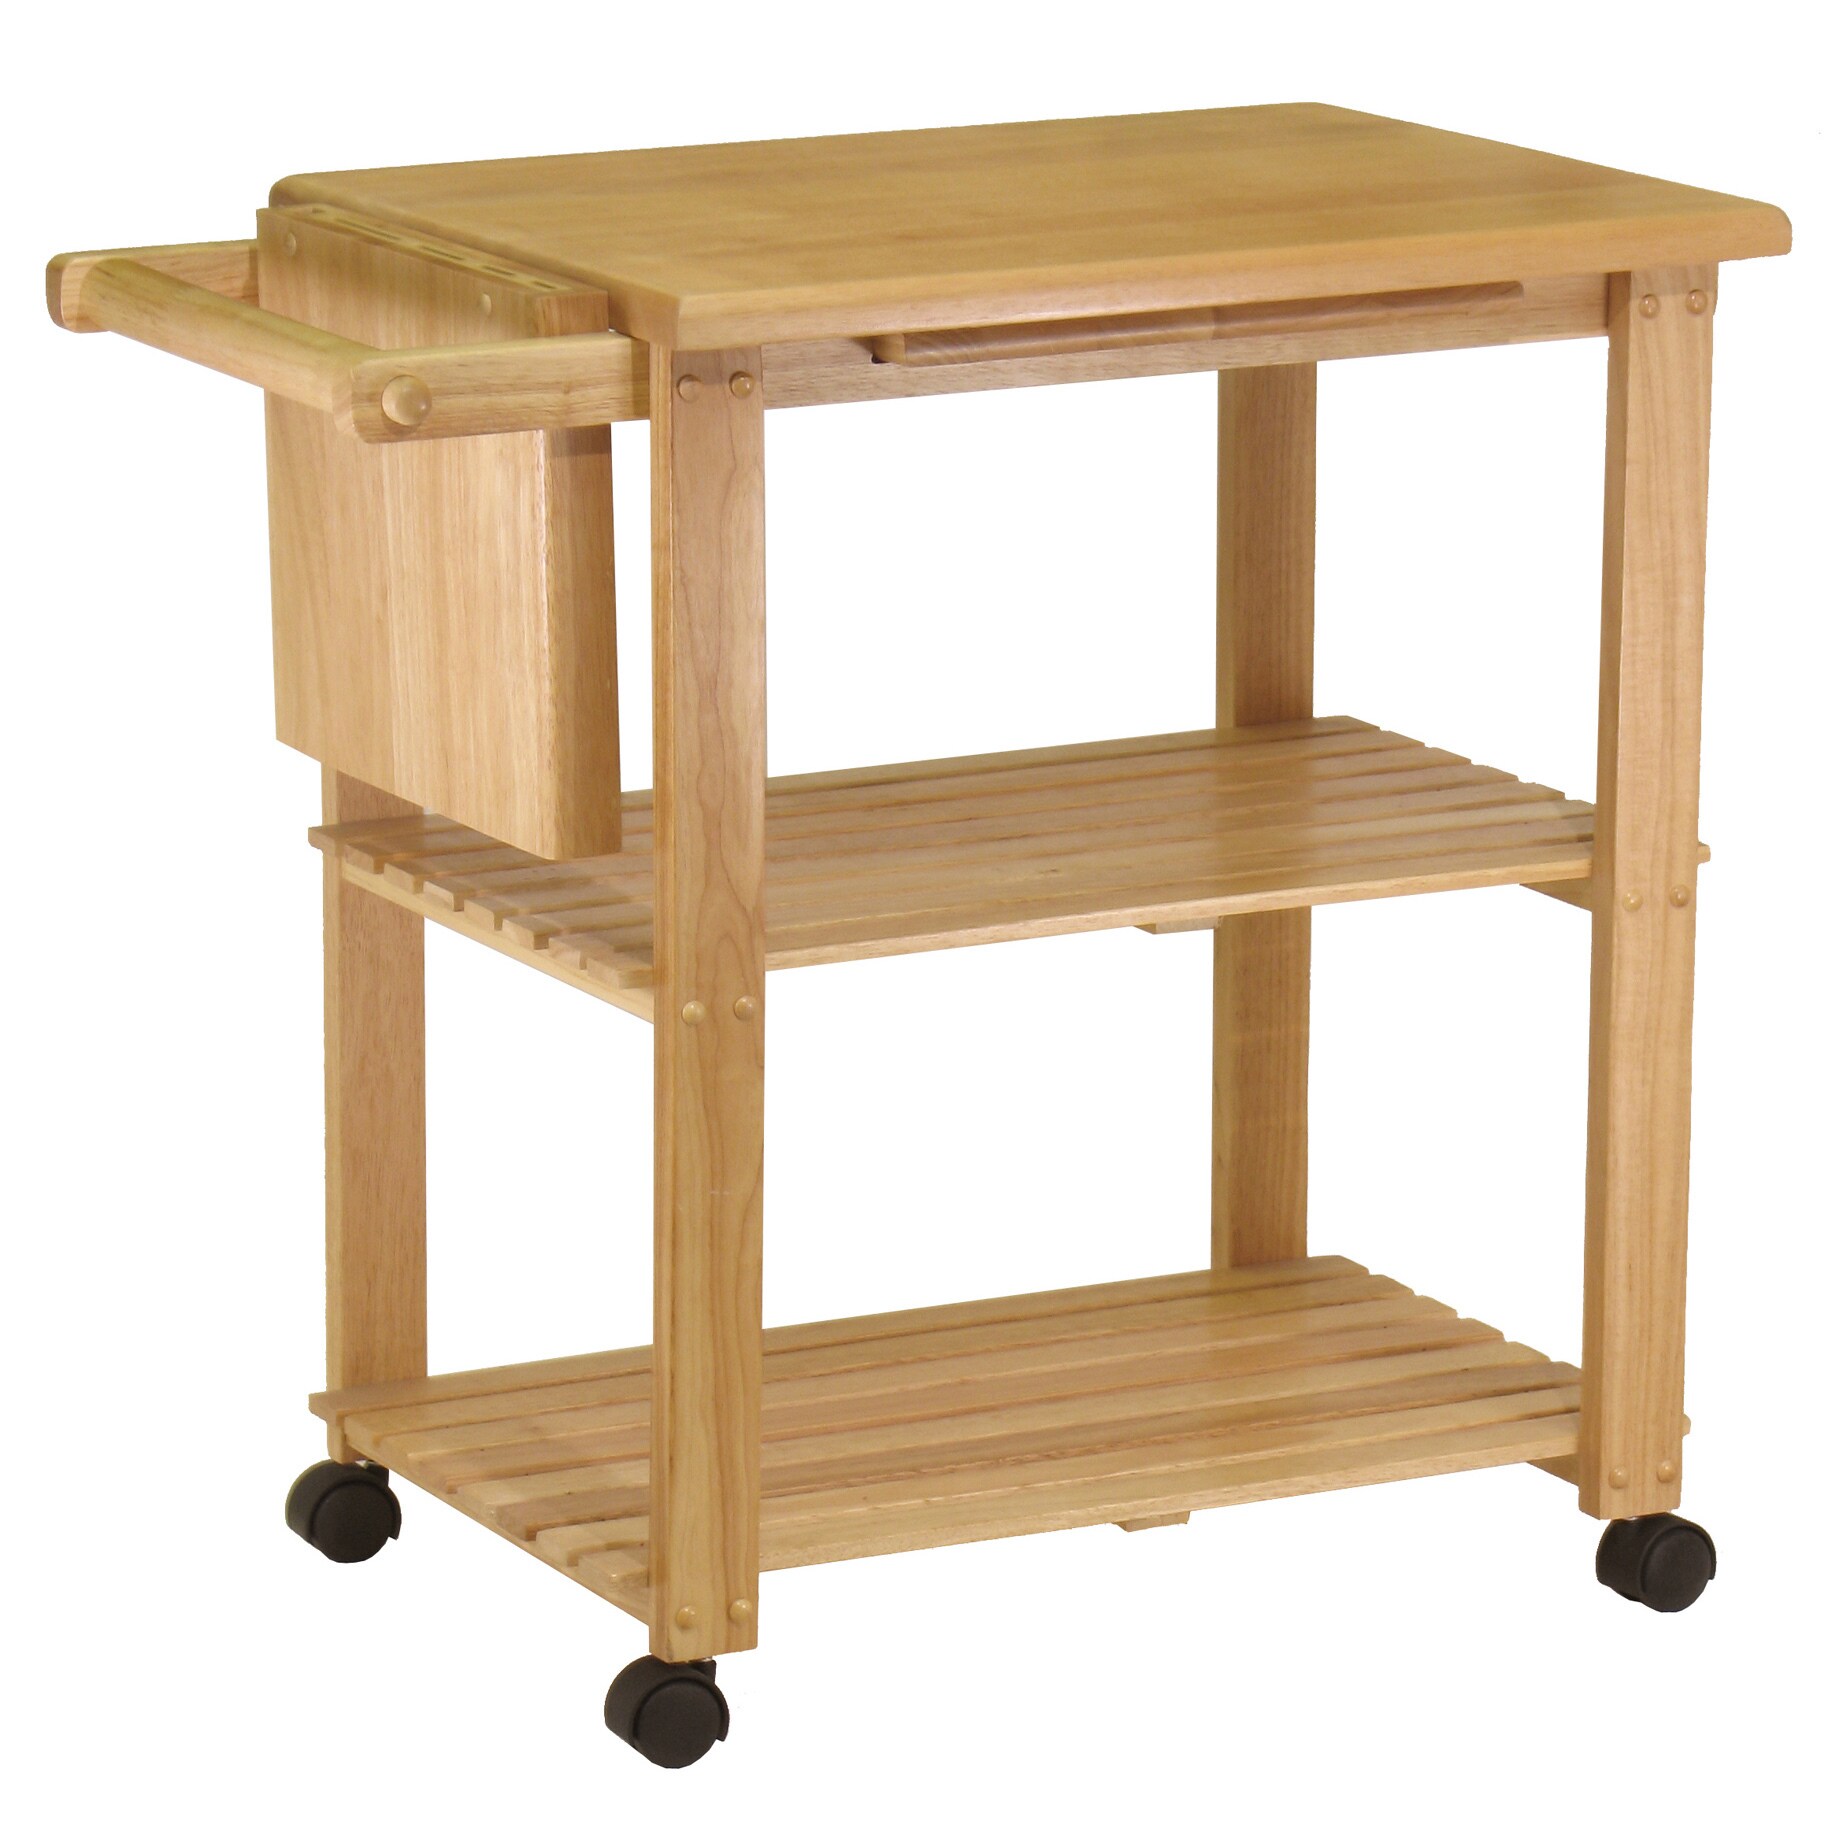 Shop Black Friday Deals On Winsome Wooden Storage Kitchen Utility Cart With Pull Out Cutting Board Overstock 12021194